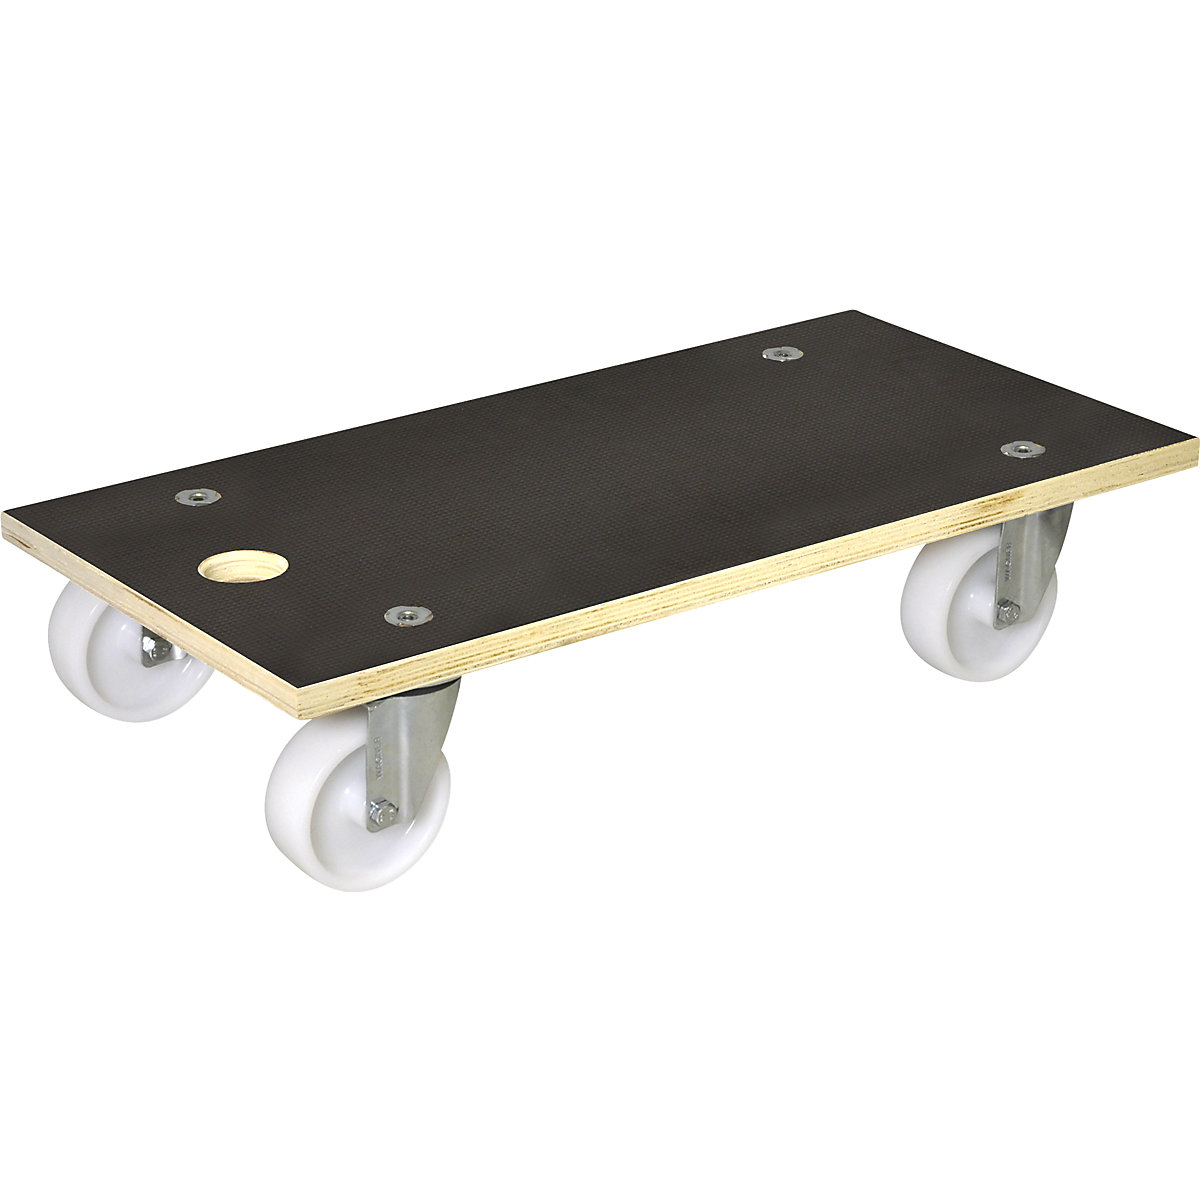 Transport dolly – Wagner, max. load 250 kg, pack of 2, LxW 575 x 300 mm, 2+ packs-7